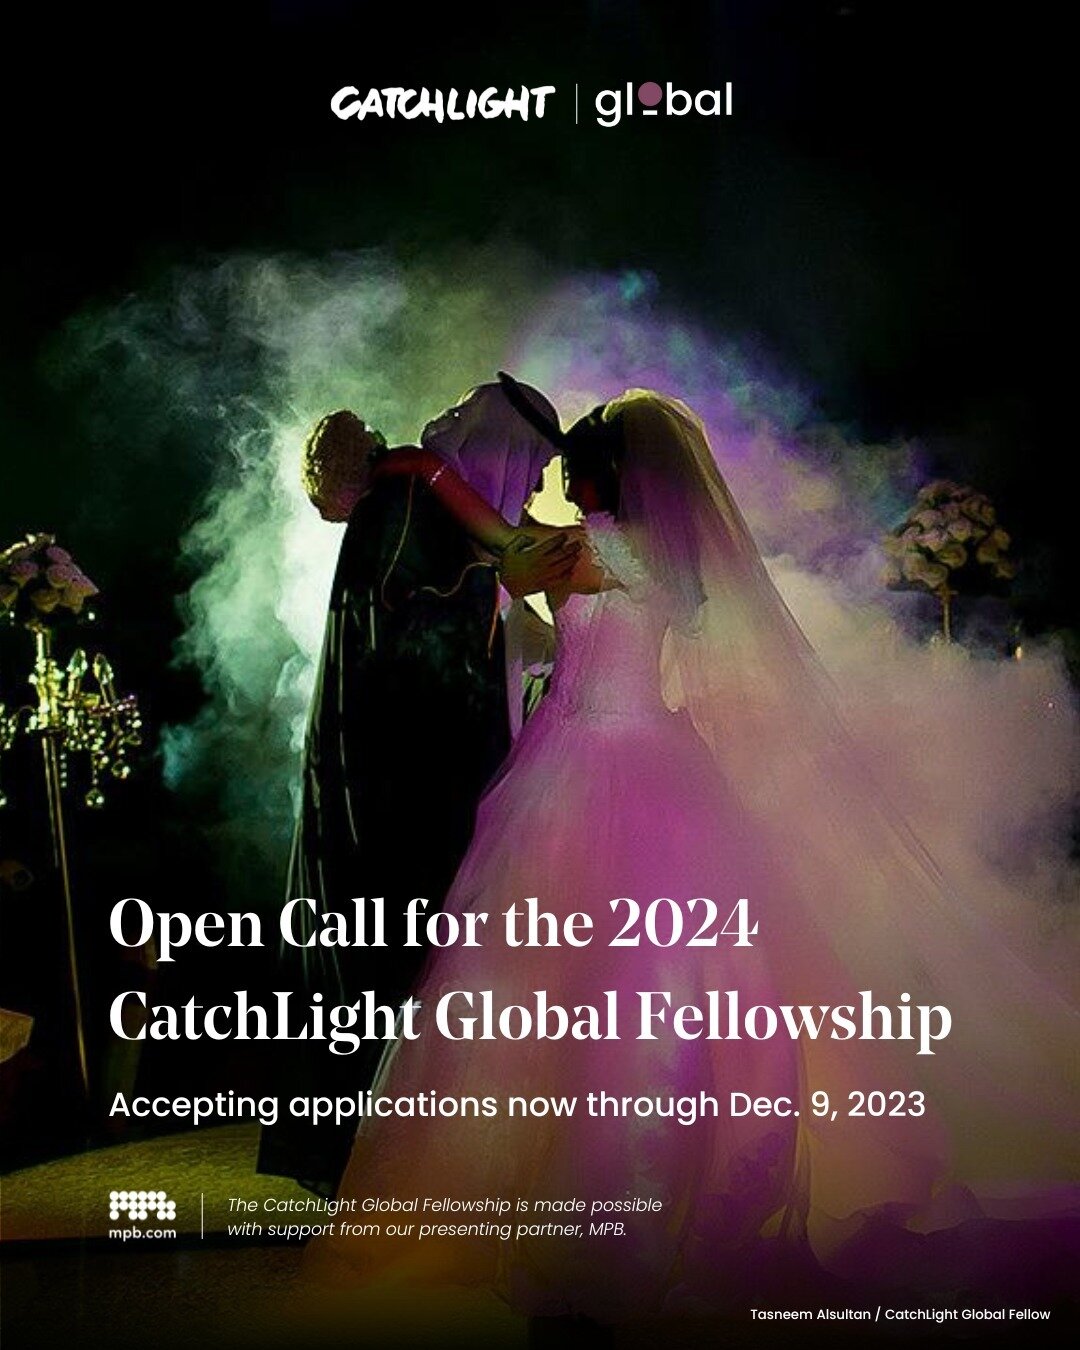 The CatchLight Global Fellowship supports visual storytellers looking to cultivate significant audience engagement through inventive distribution methods that will increase the impact of their work. 

Who should apply?

Our goal is to bring resources